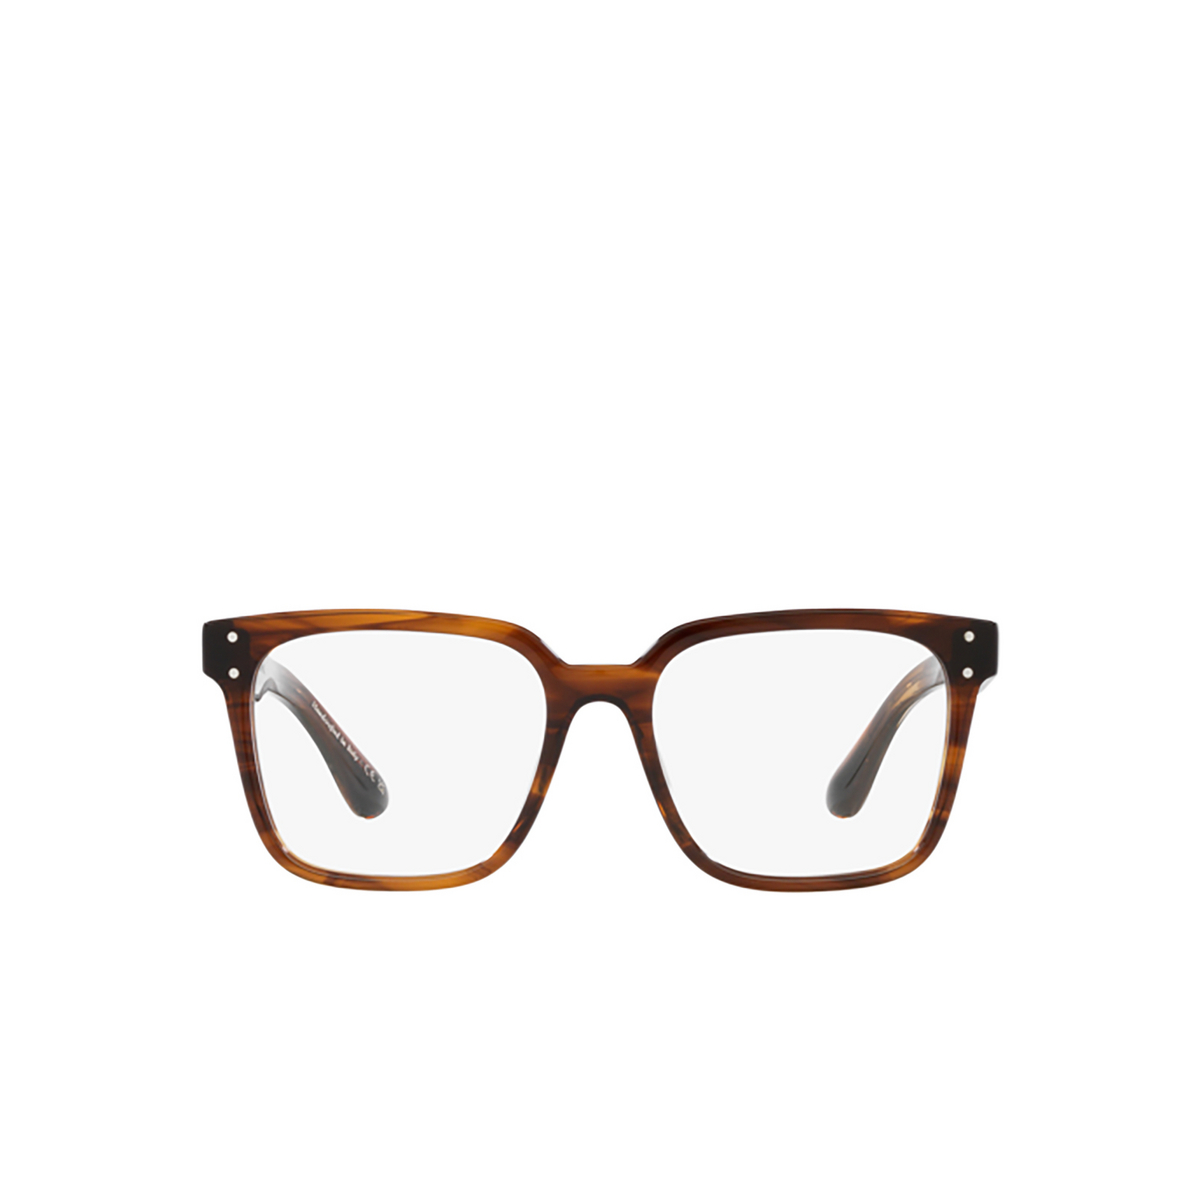 Oliver Peoples PARCELL Eyeglasses 1724 Tuscany Tortoise - 1/4